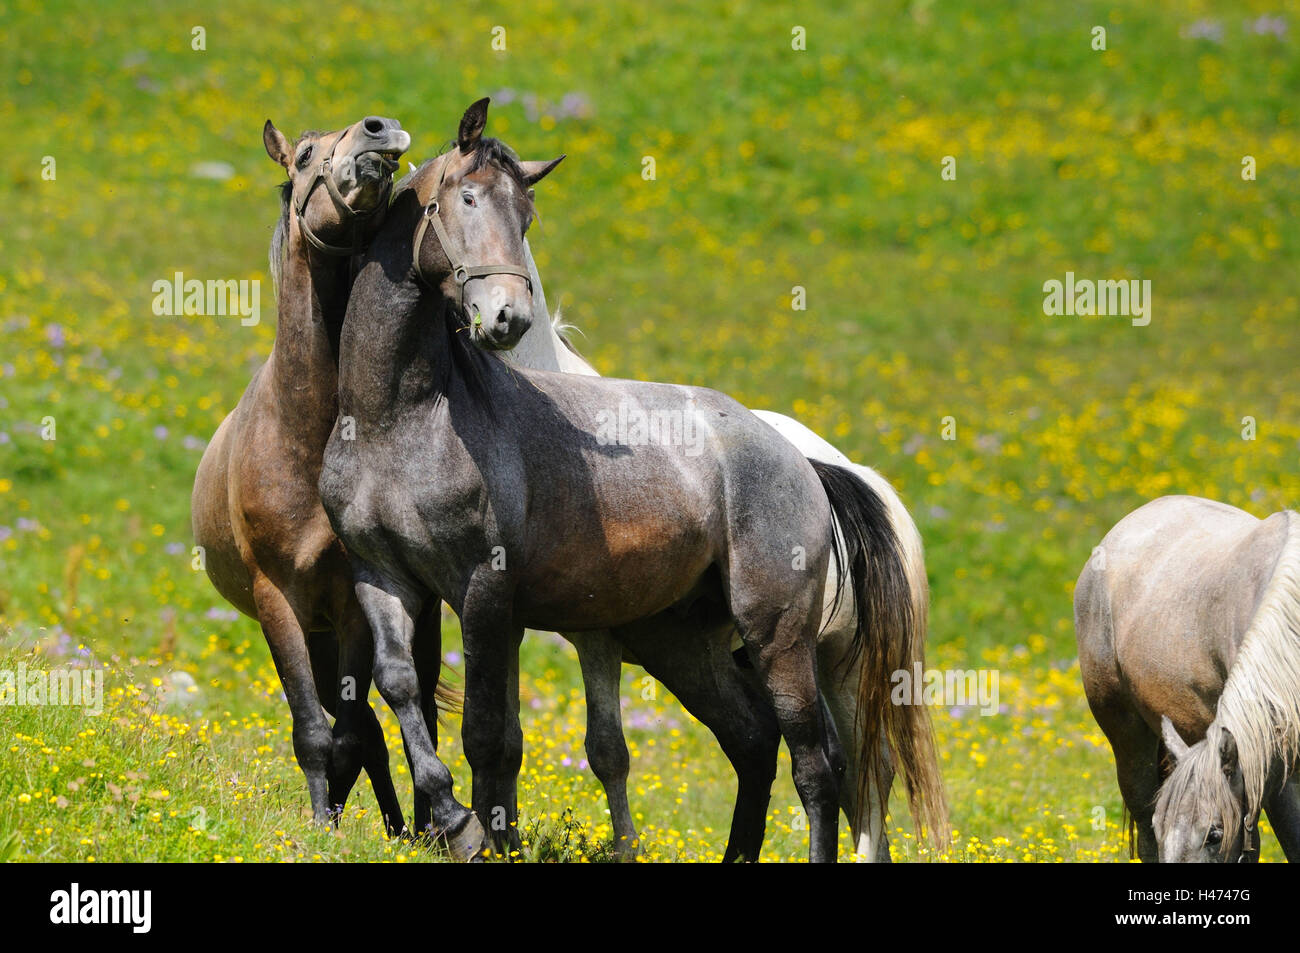 Domestic horses, Equus ferus caballus, head-on, stand, fight, flower meadow, scenery, Stock Photo